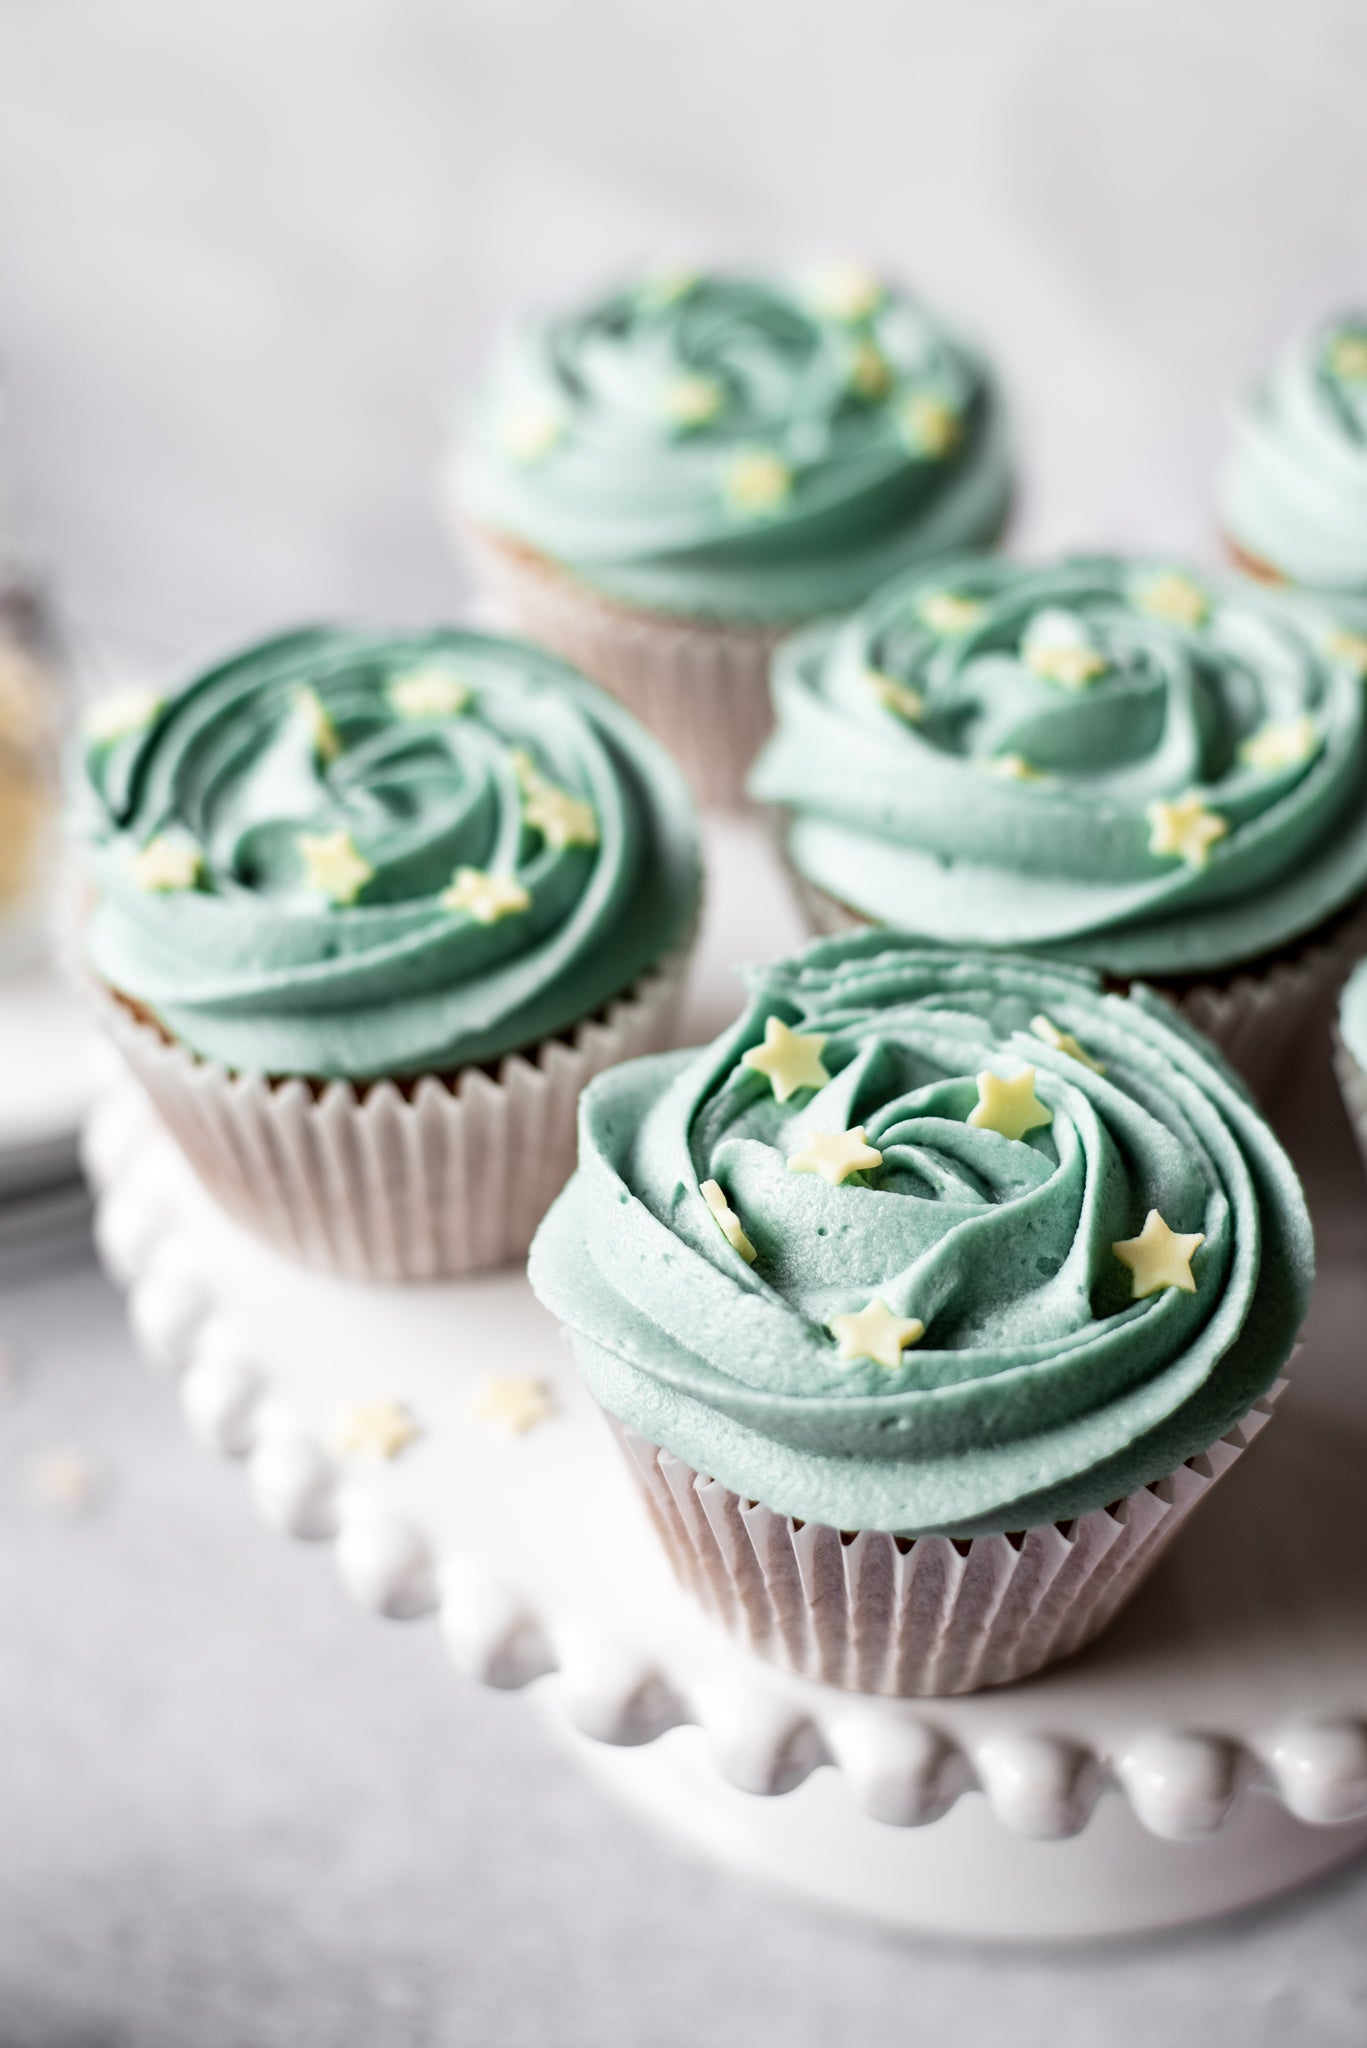 Earl Grey cupcakes with blue buttercream icing